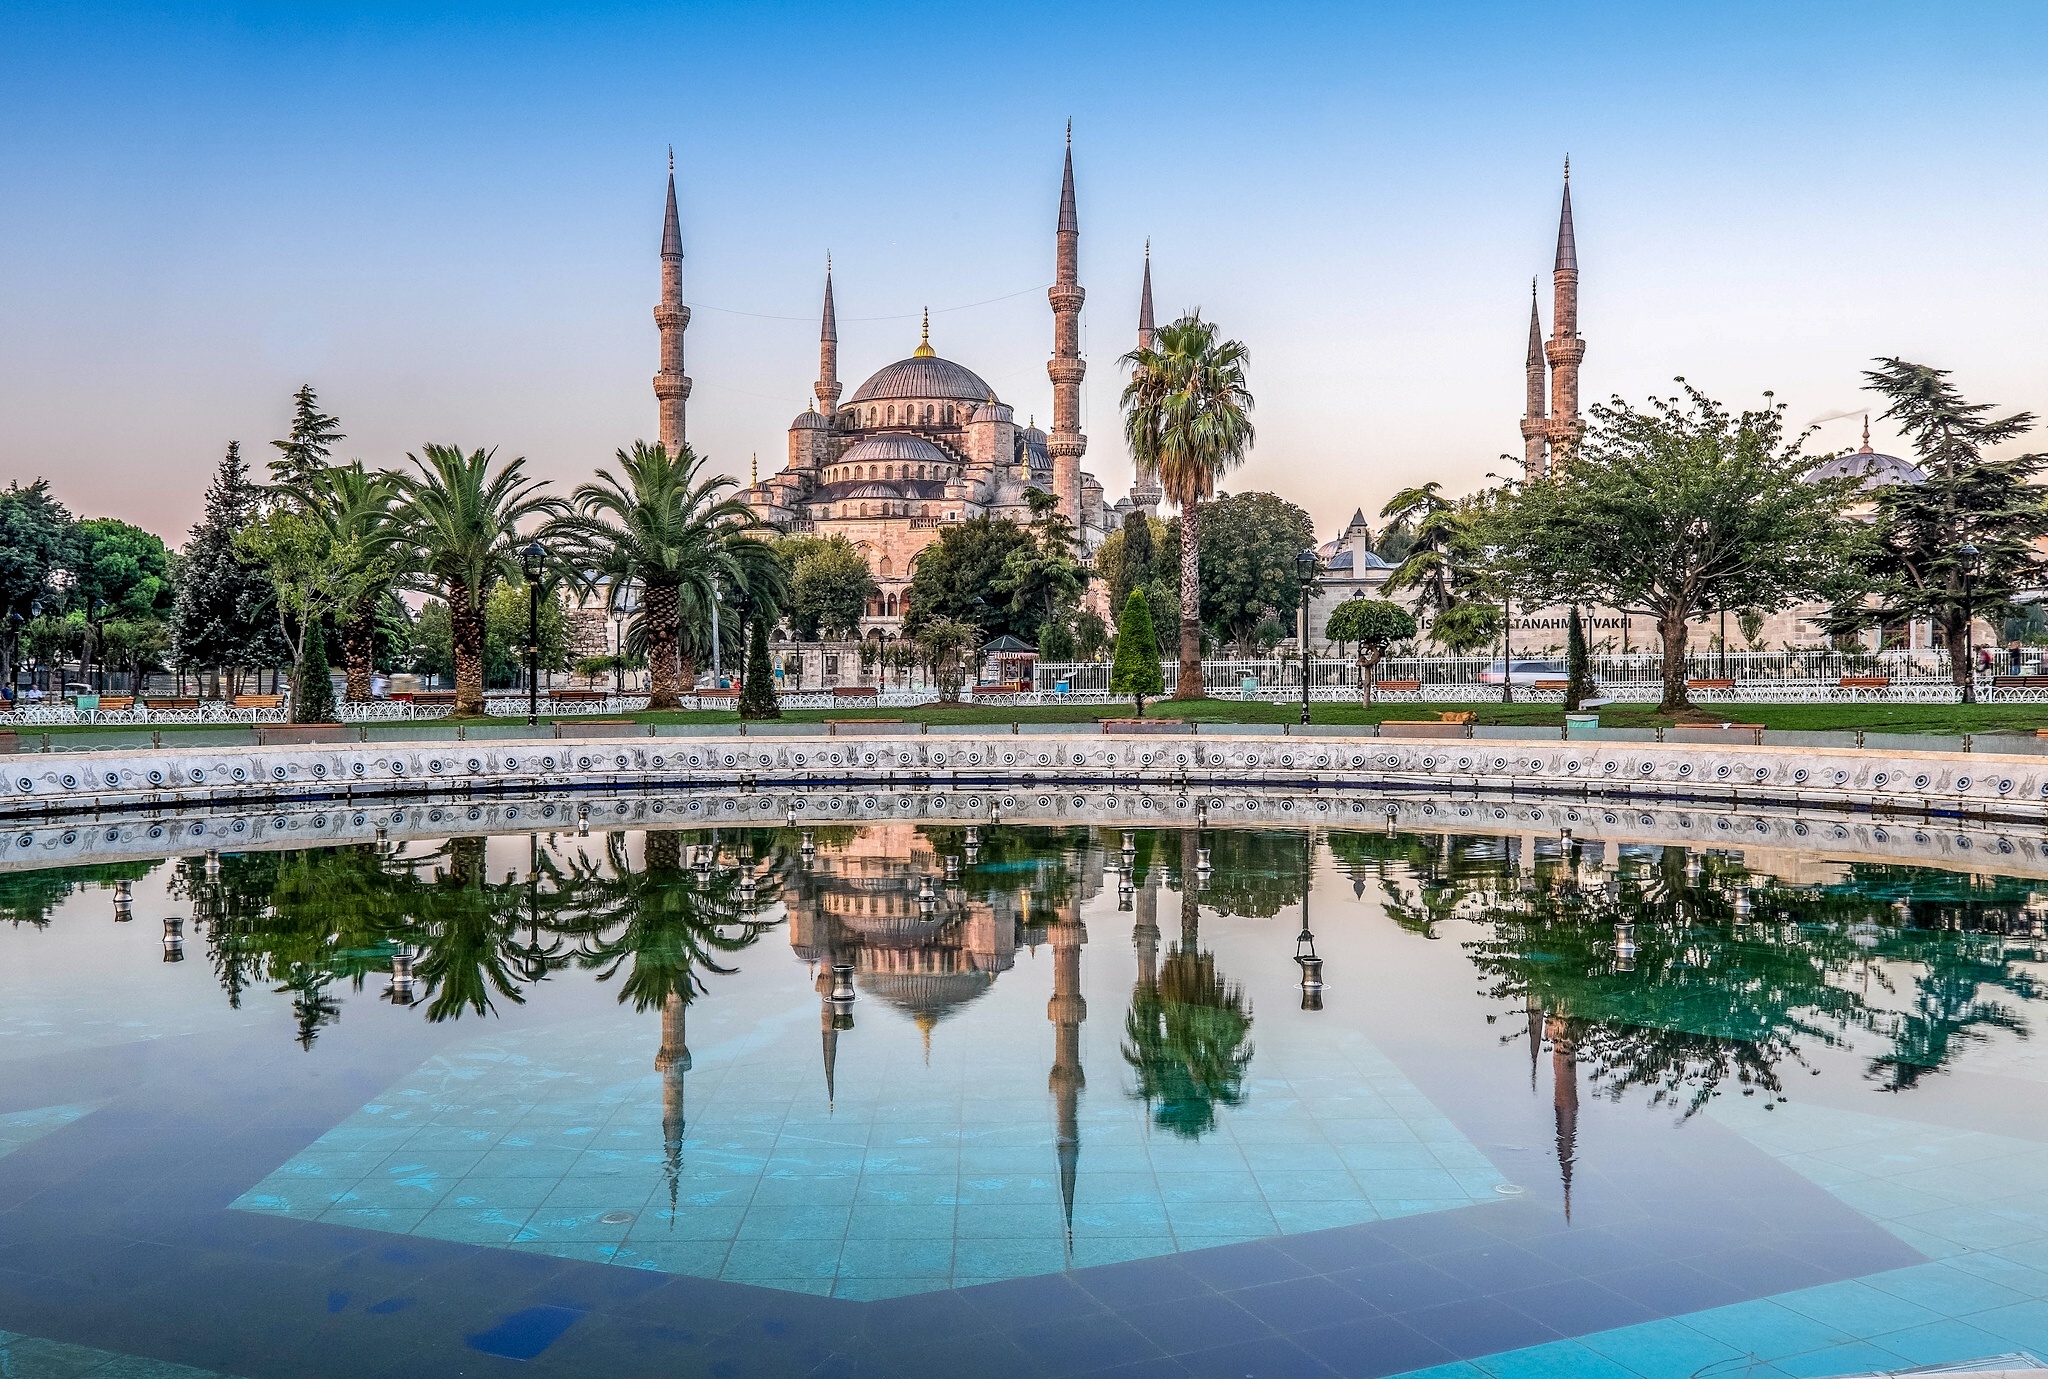 sultan ahmed mosque, turkey, mosque, religious, istalbul, mosques wallpaper for mobile